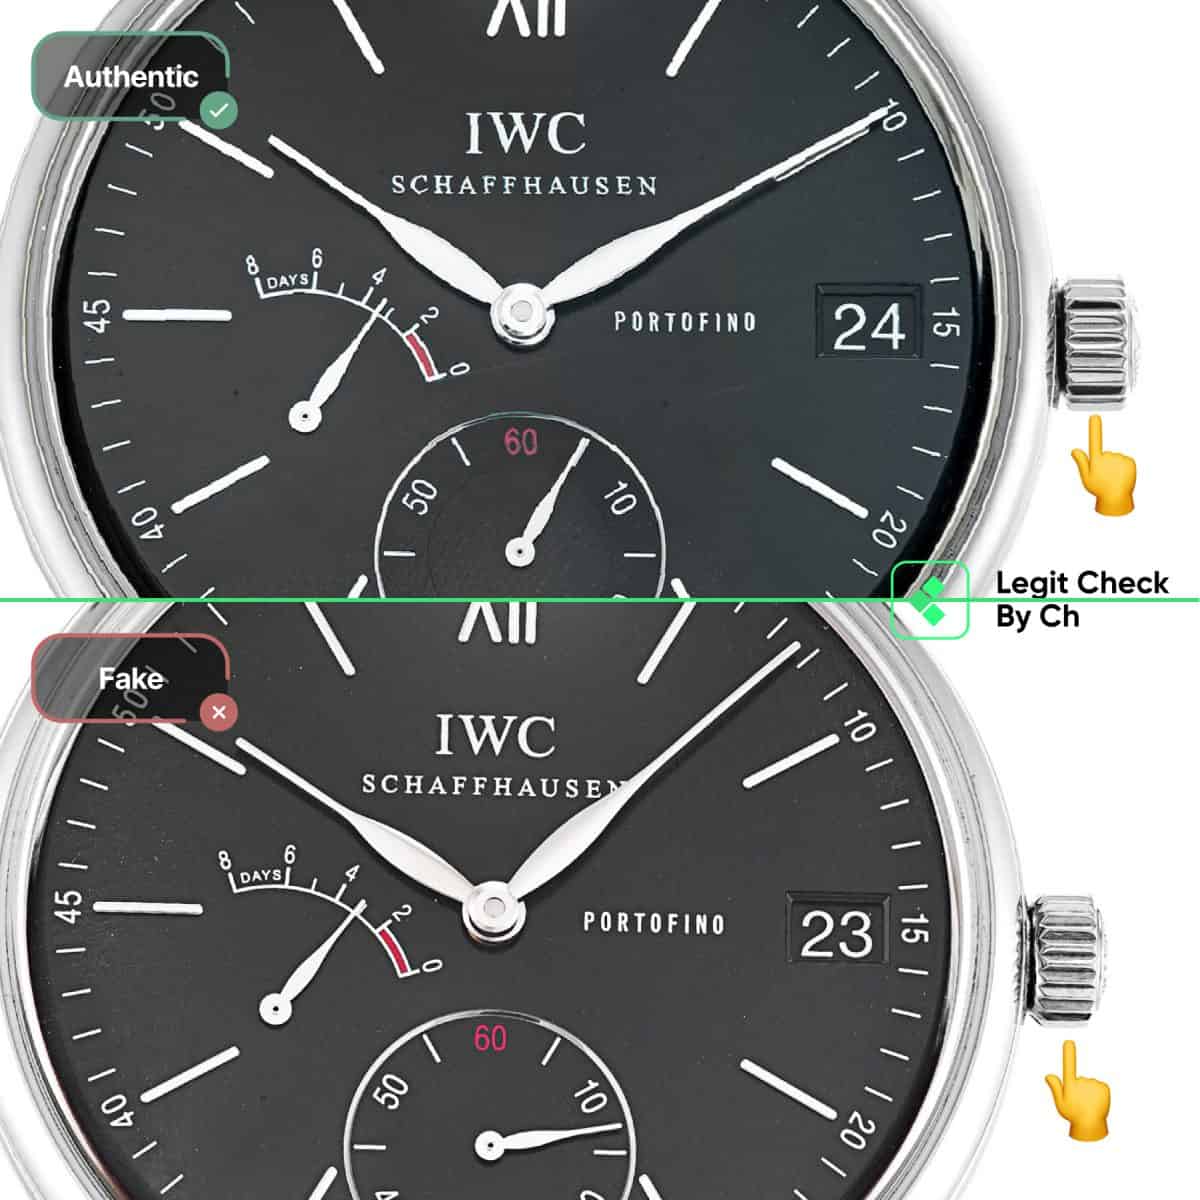 iwc watch authenticity check guide